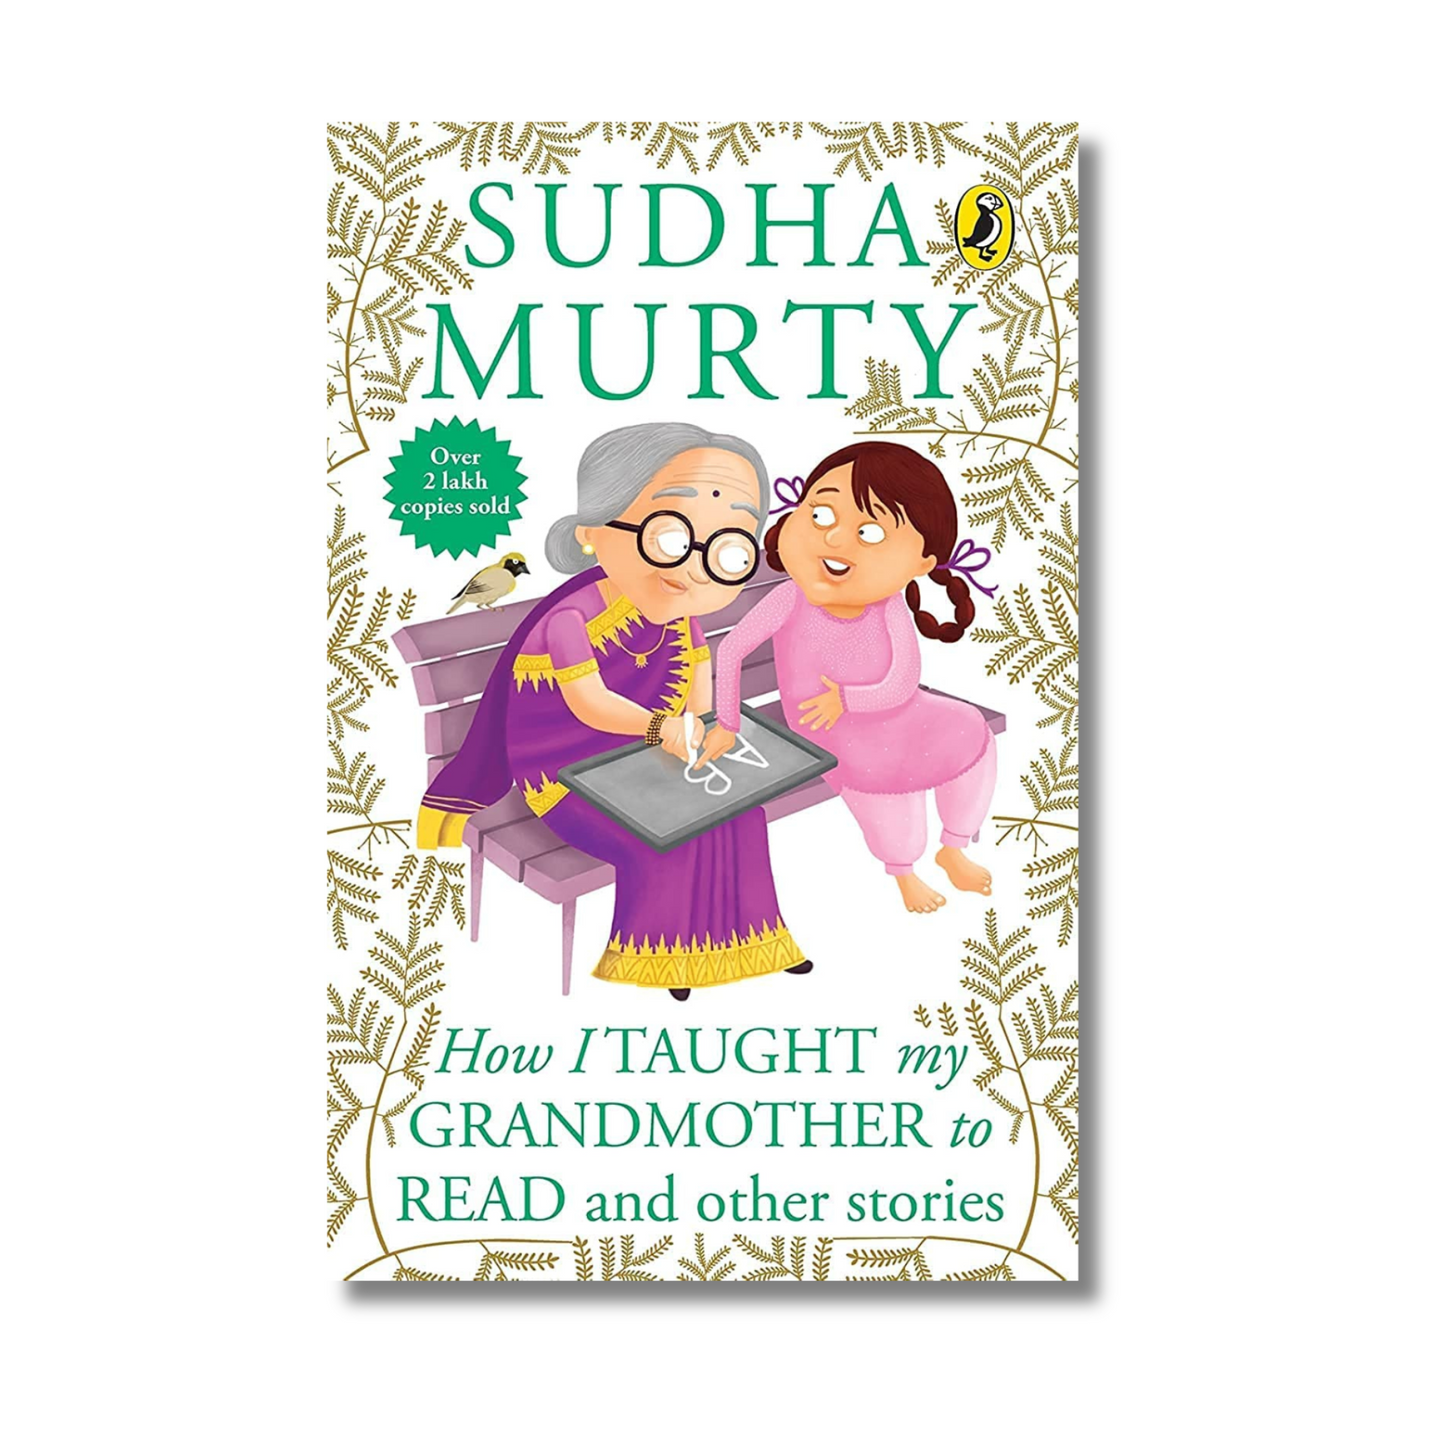 How I Taught My Grandmother to Read: And Other Stories by Sudha Murty (Paperback)